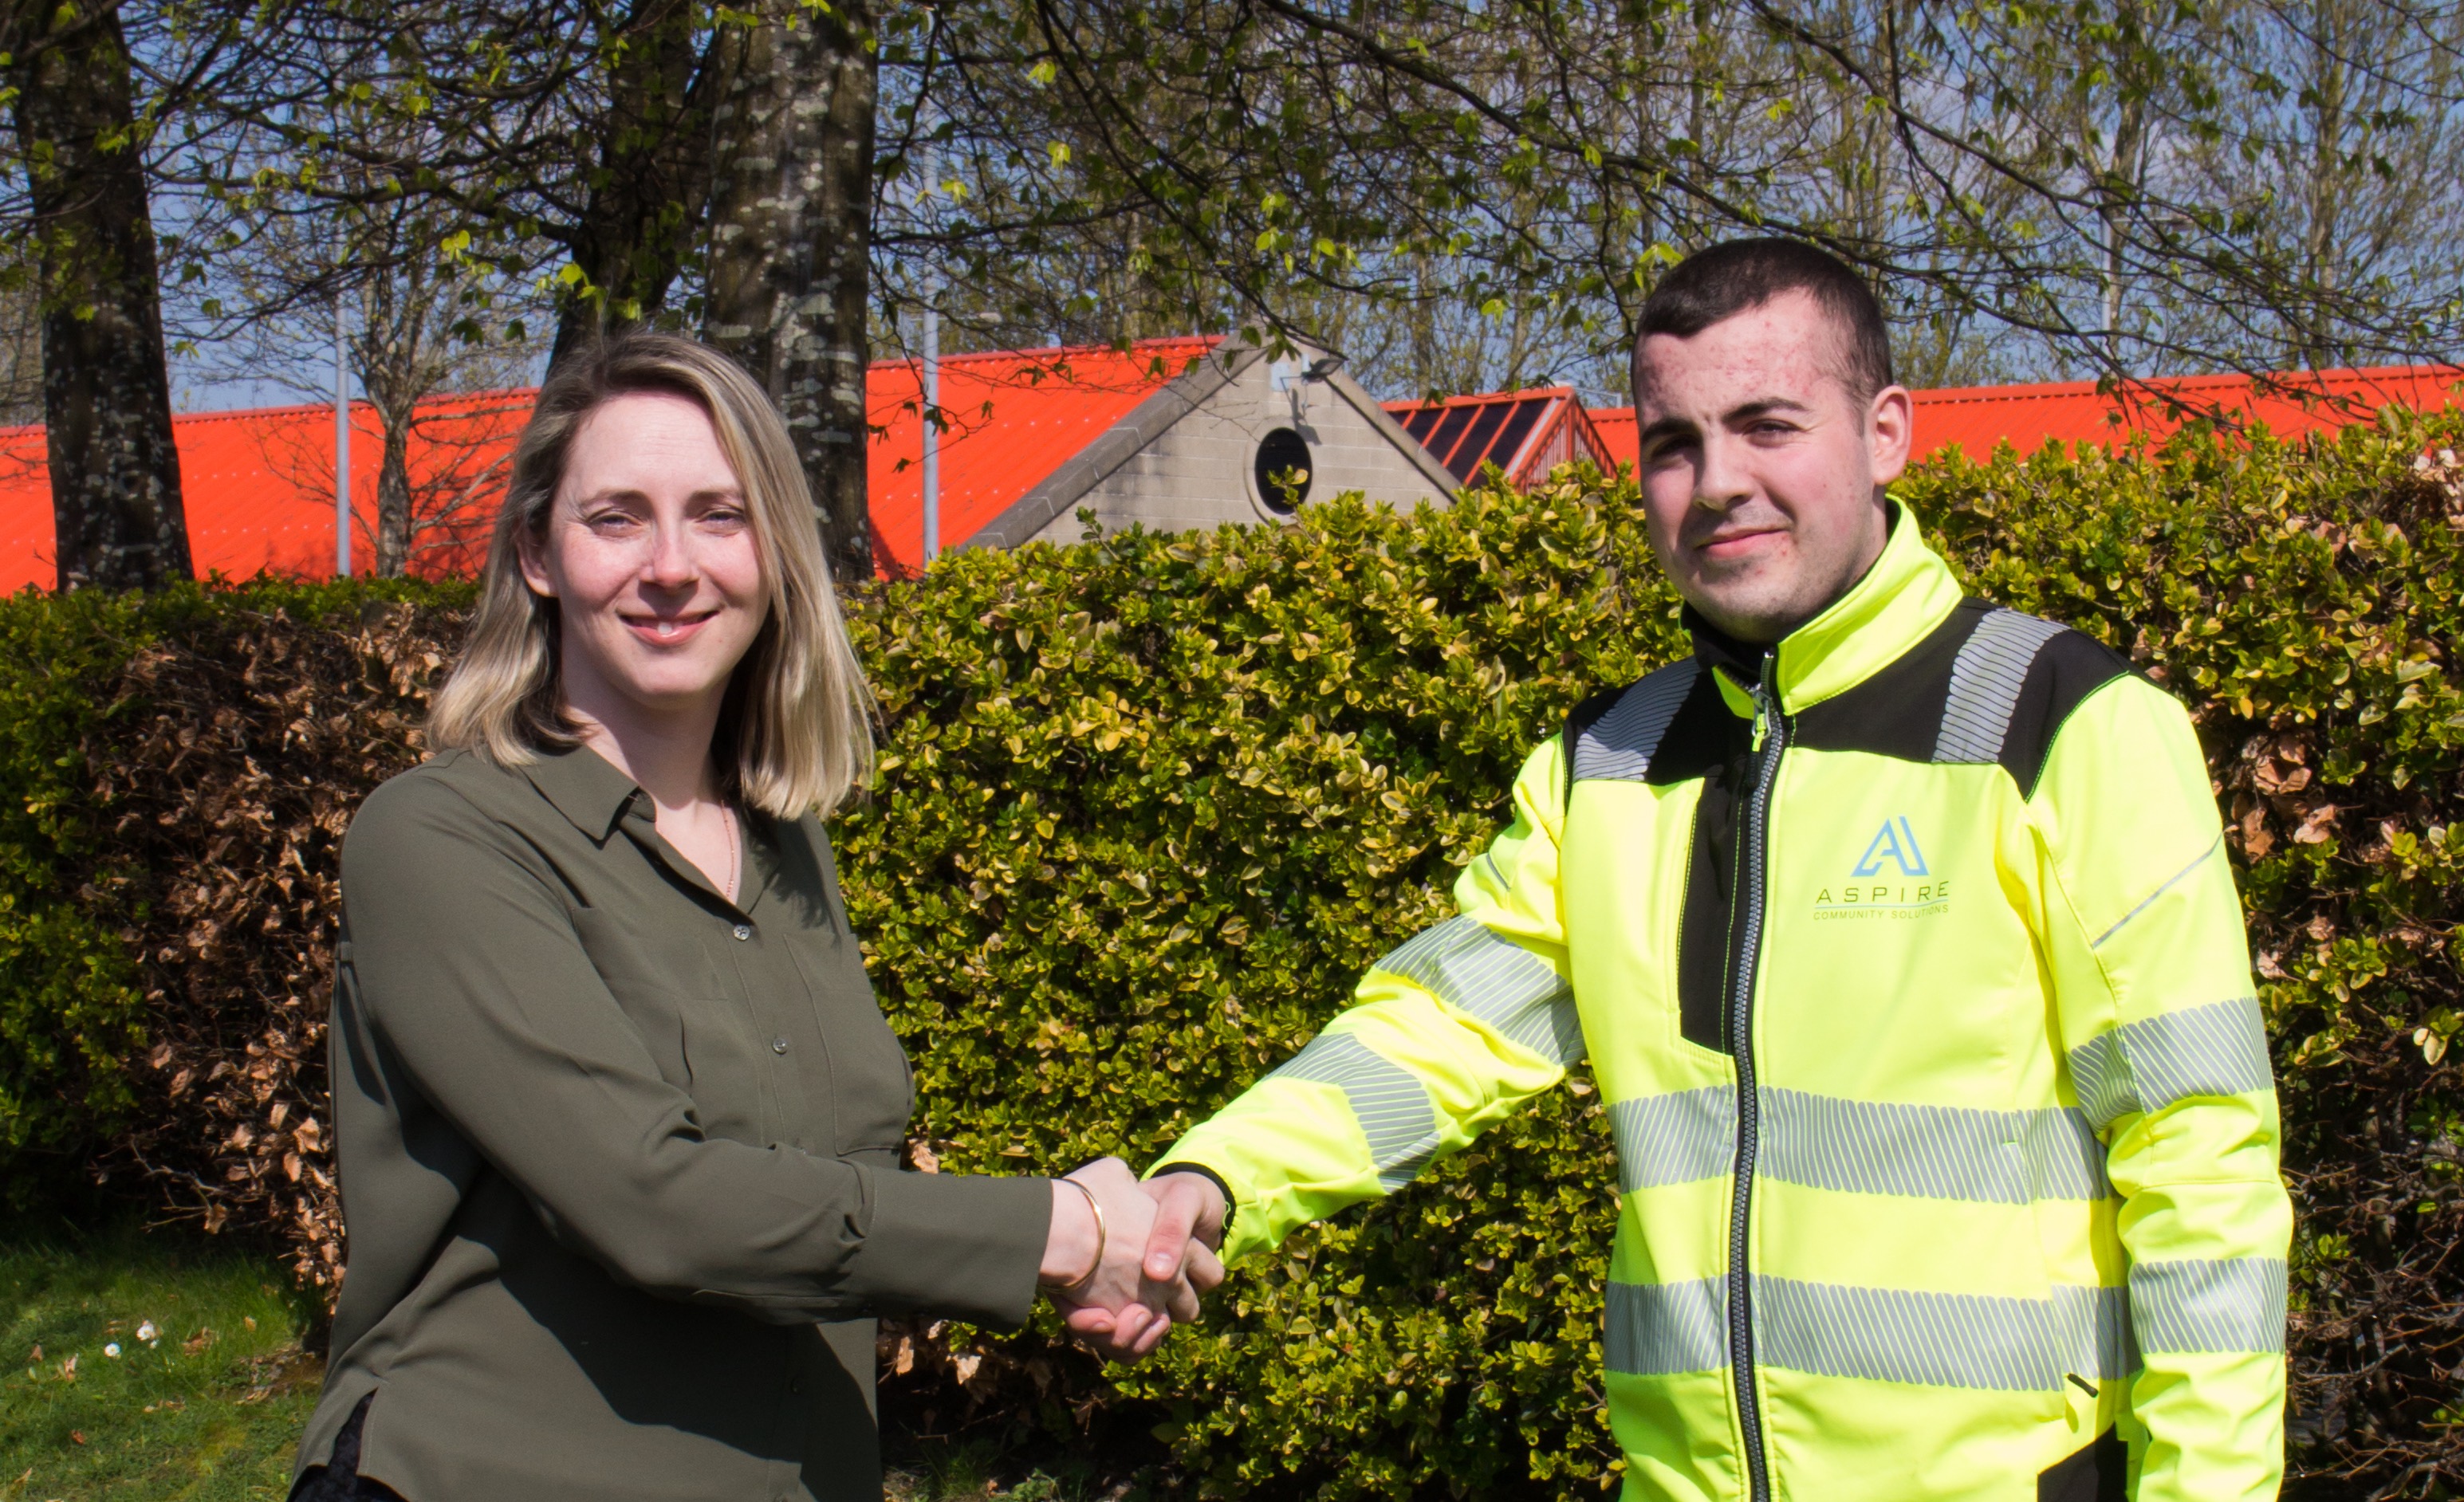 Ferguslie Park appoints local supported business to grounds maintenance contract